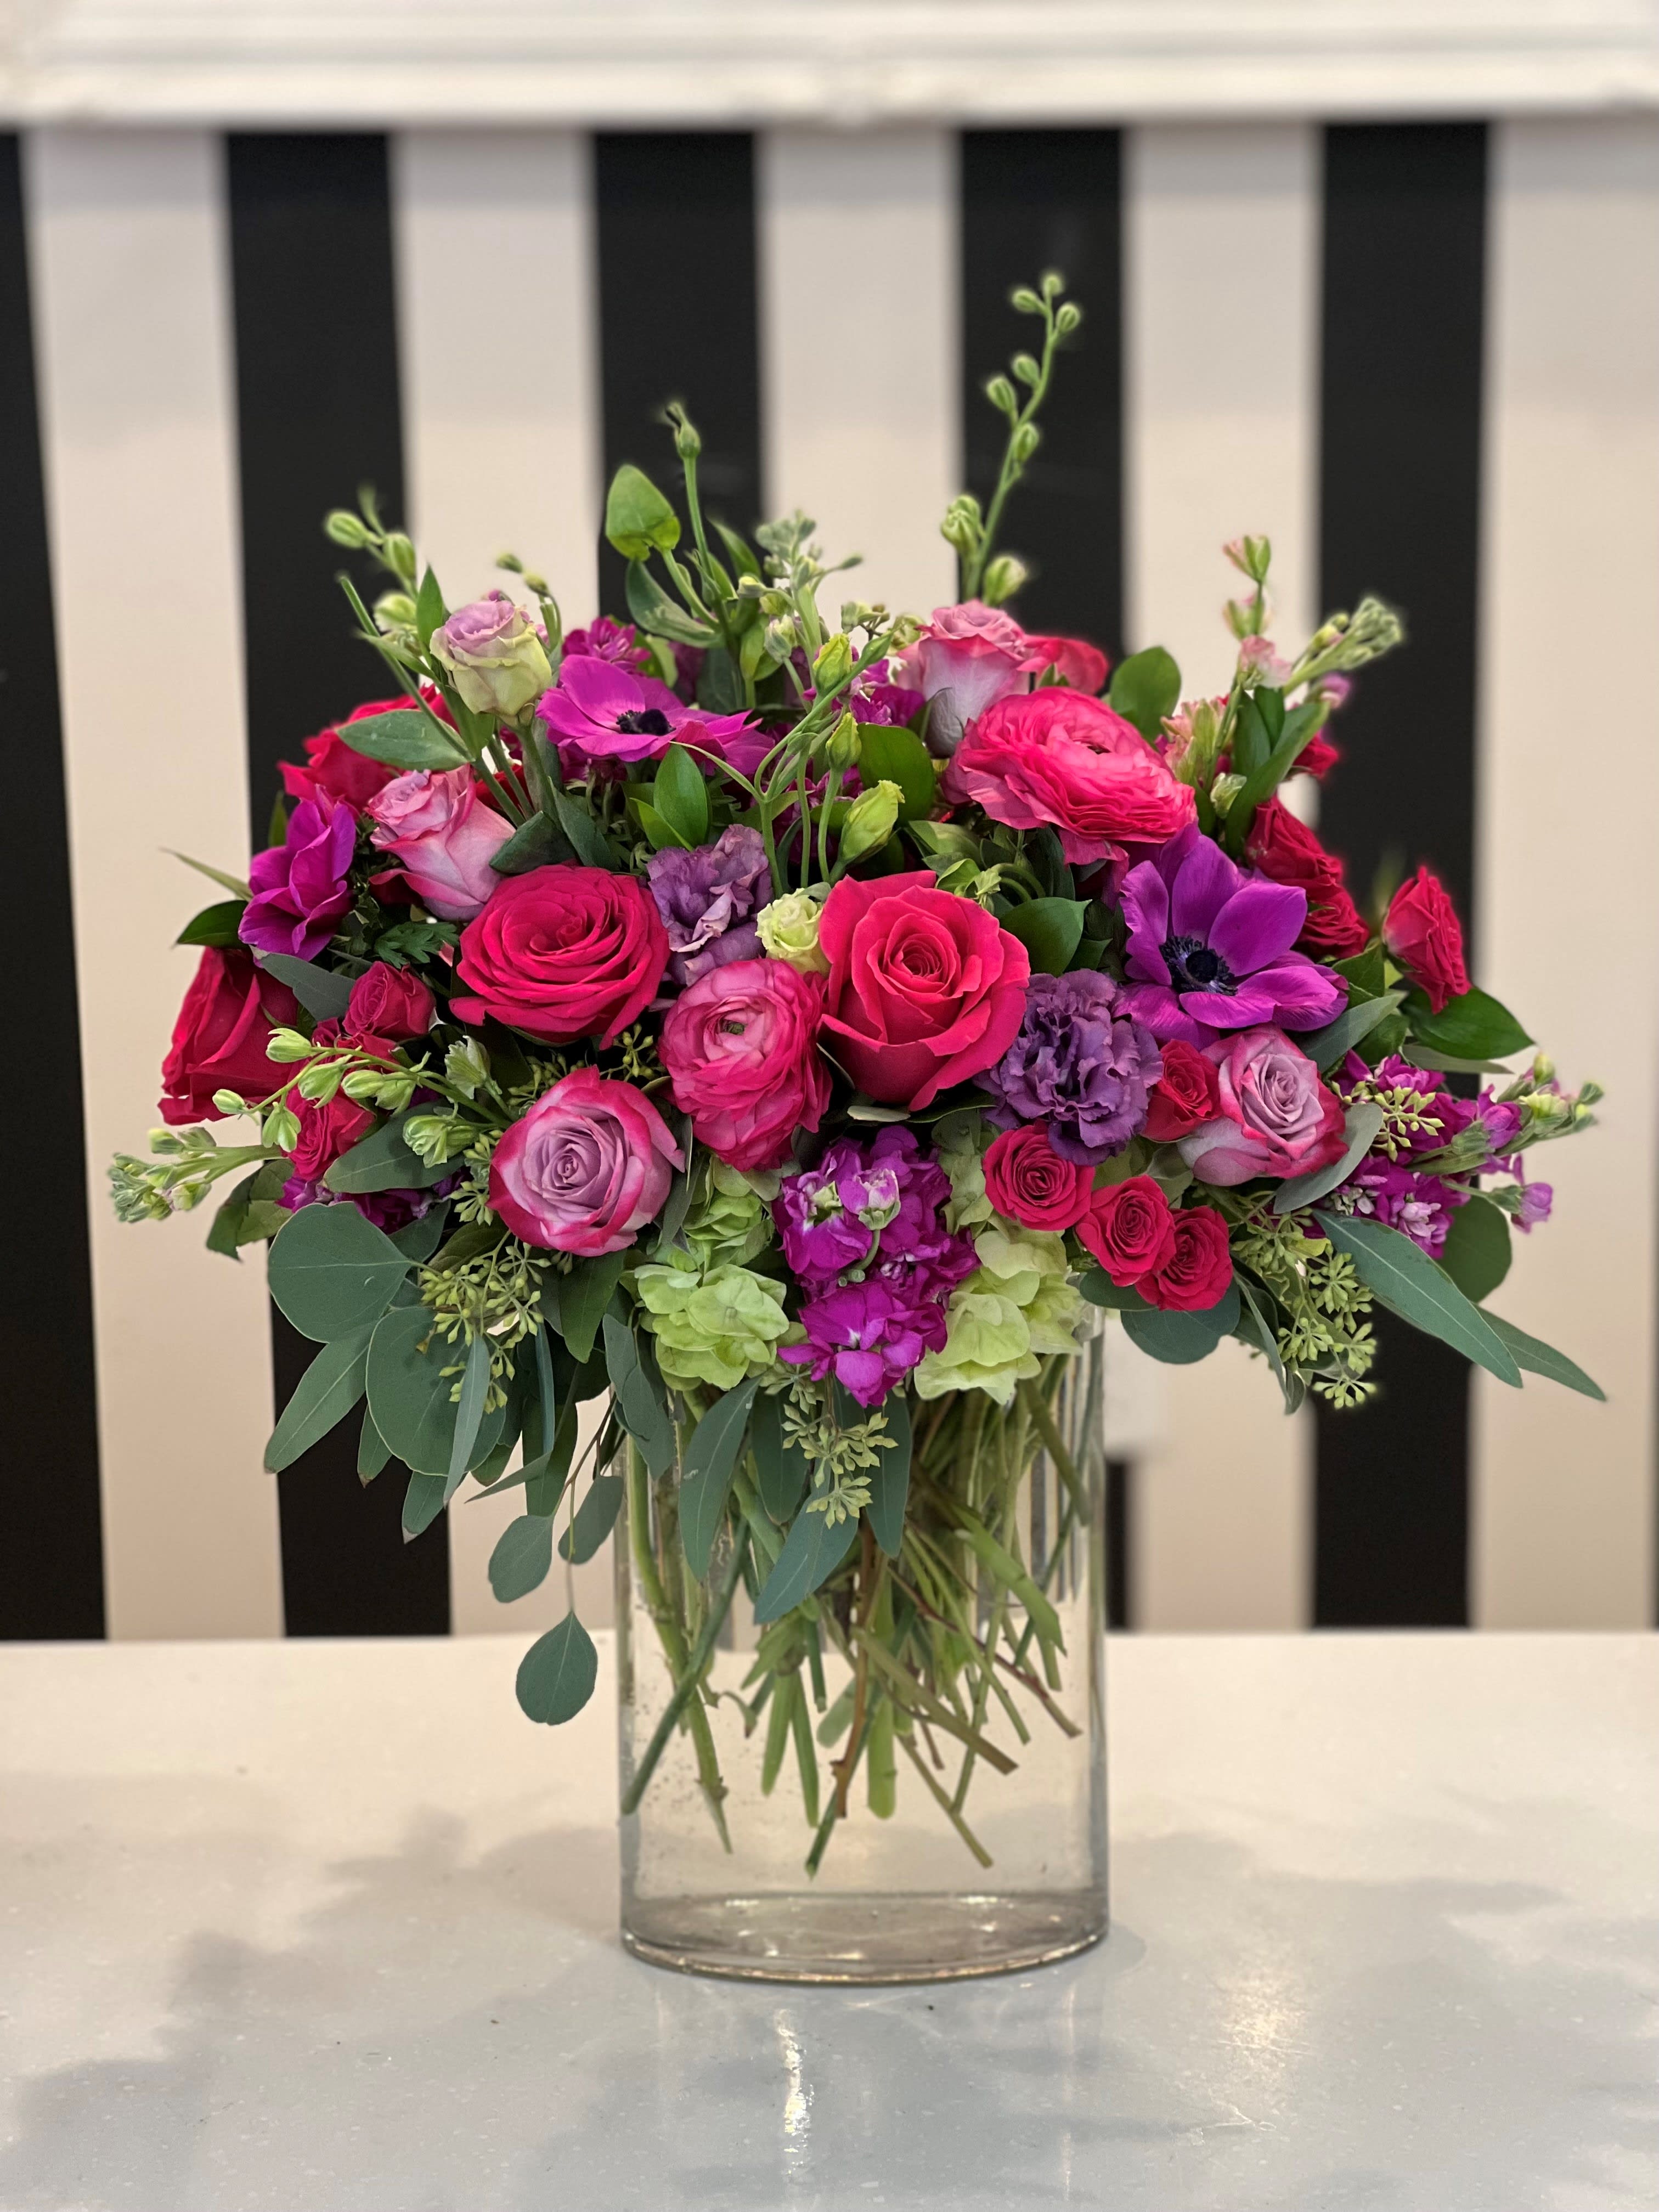 Hot Pink Summer - Beautiful bright pink and purple flowers in a tall vase, filled with eucalyptus and other greenery